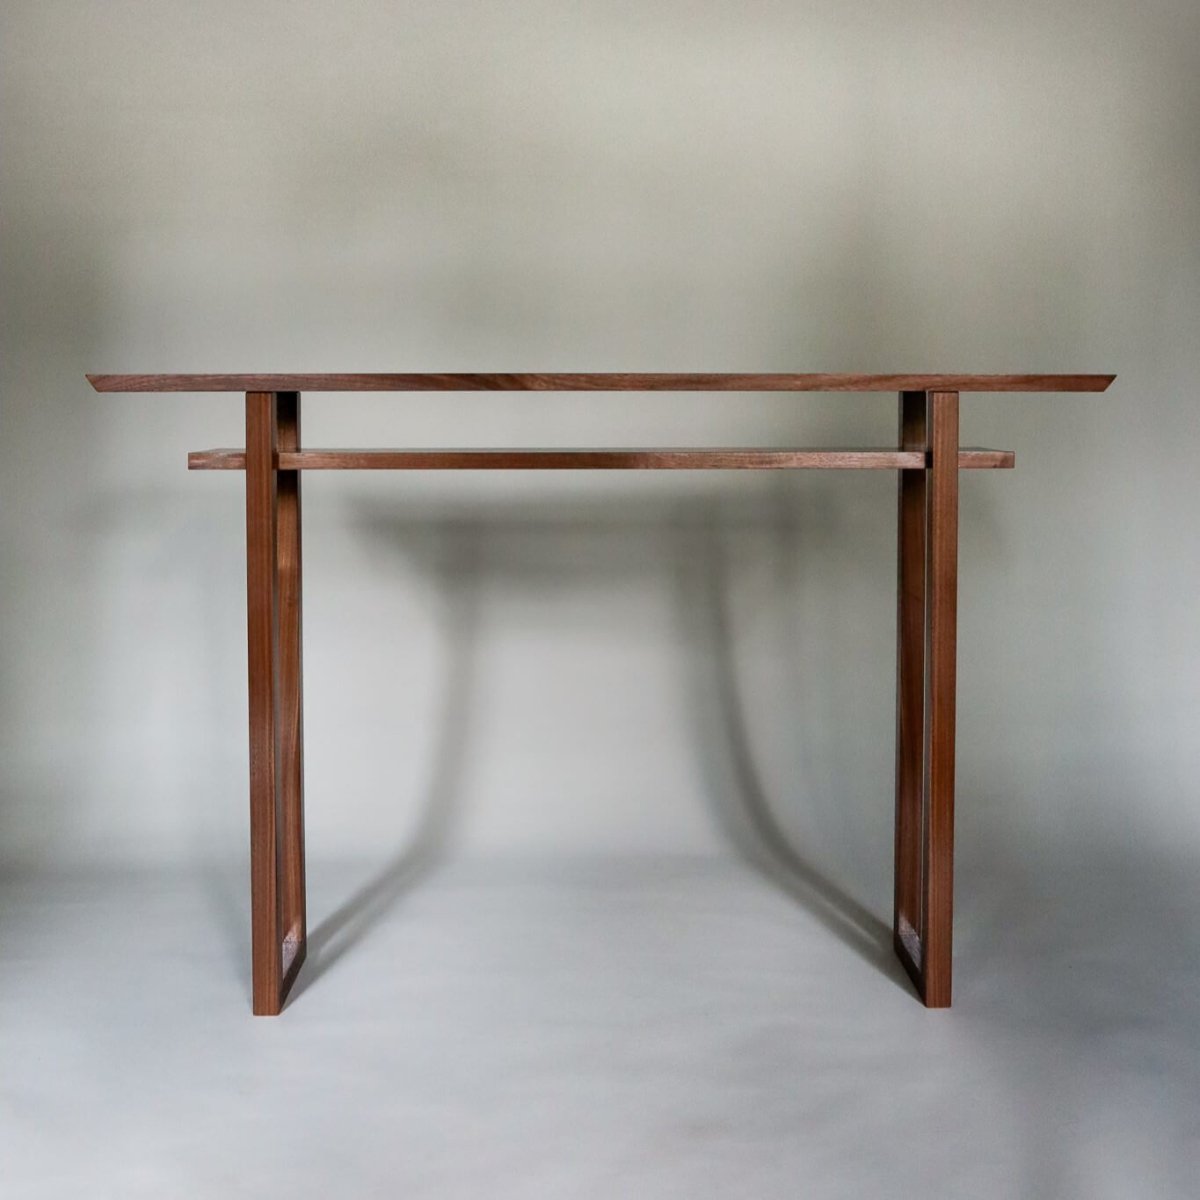 A walnut console table with shelf by Mokuzai Furniture.  This narrow console table is perfect for a hallway table or entryway table.